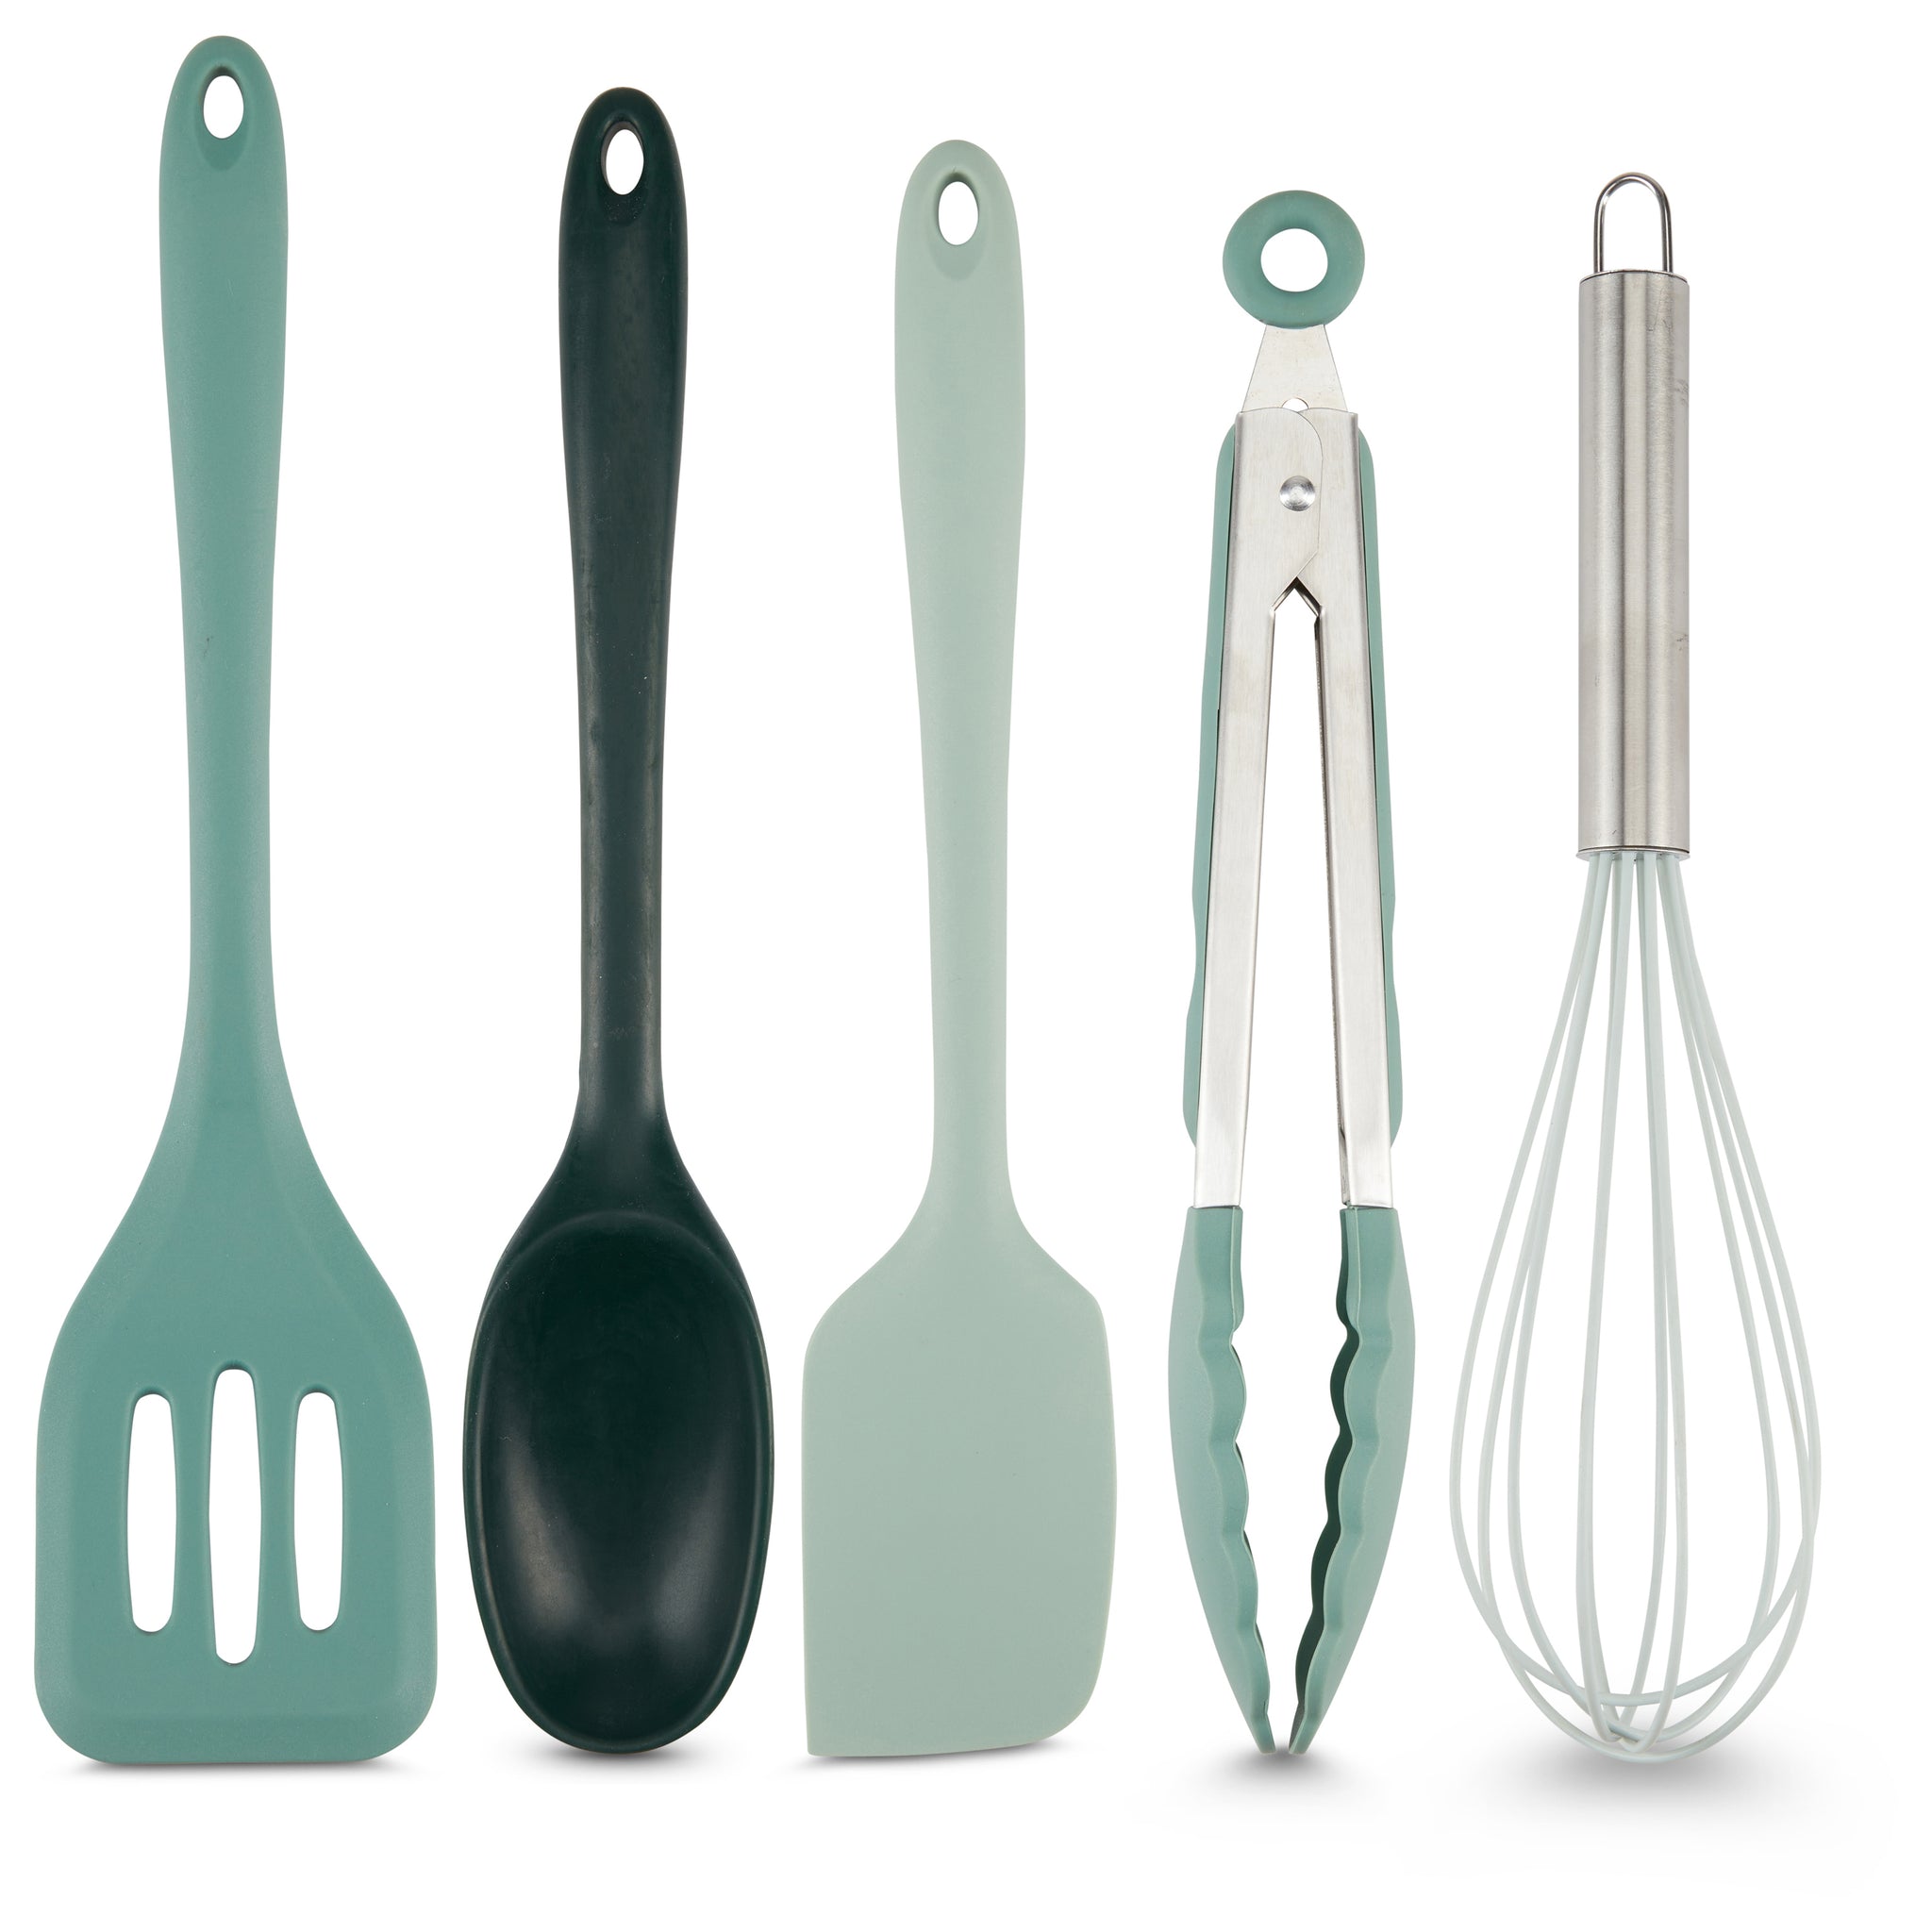 5-Piece Gray Mini Silicone Tool Set, Sold by at Home